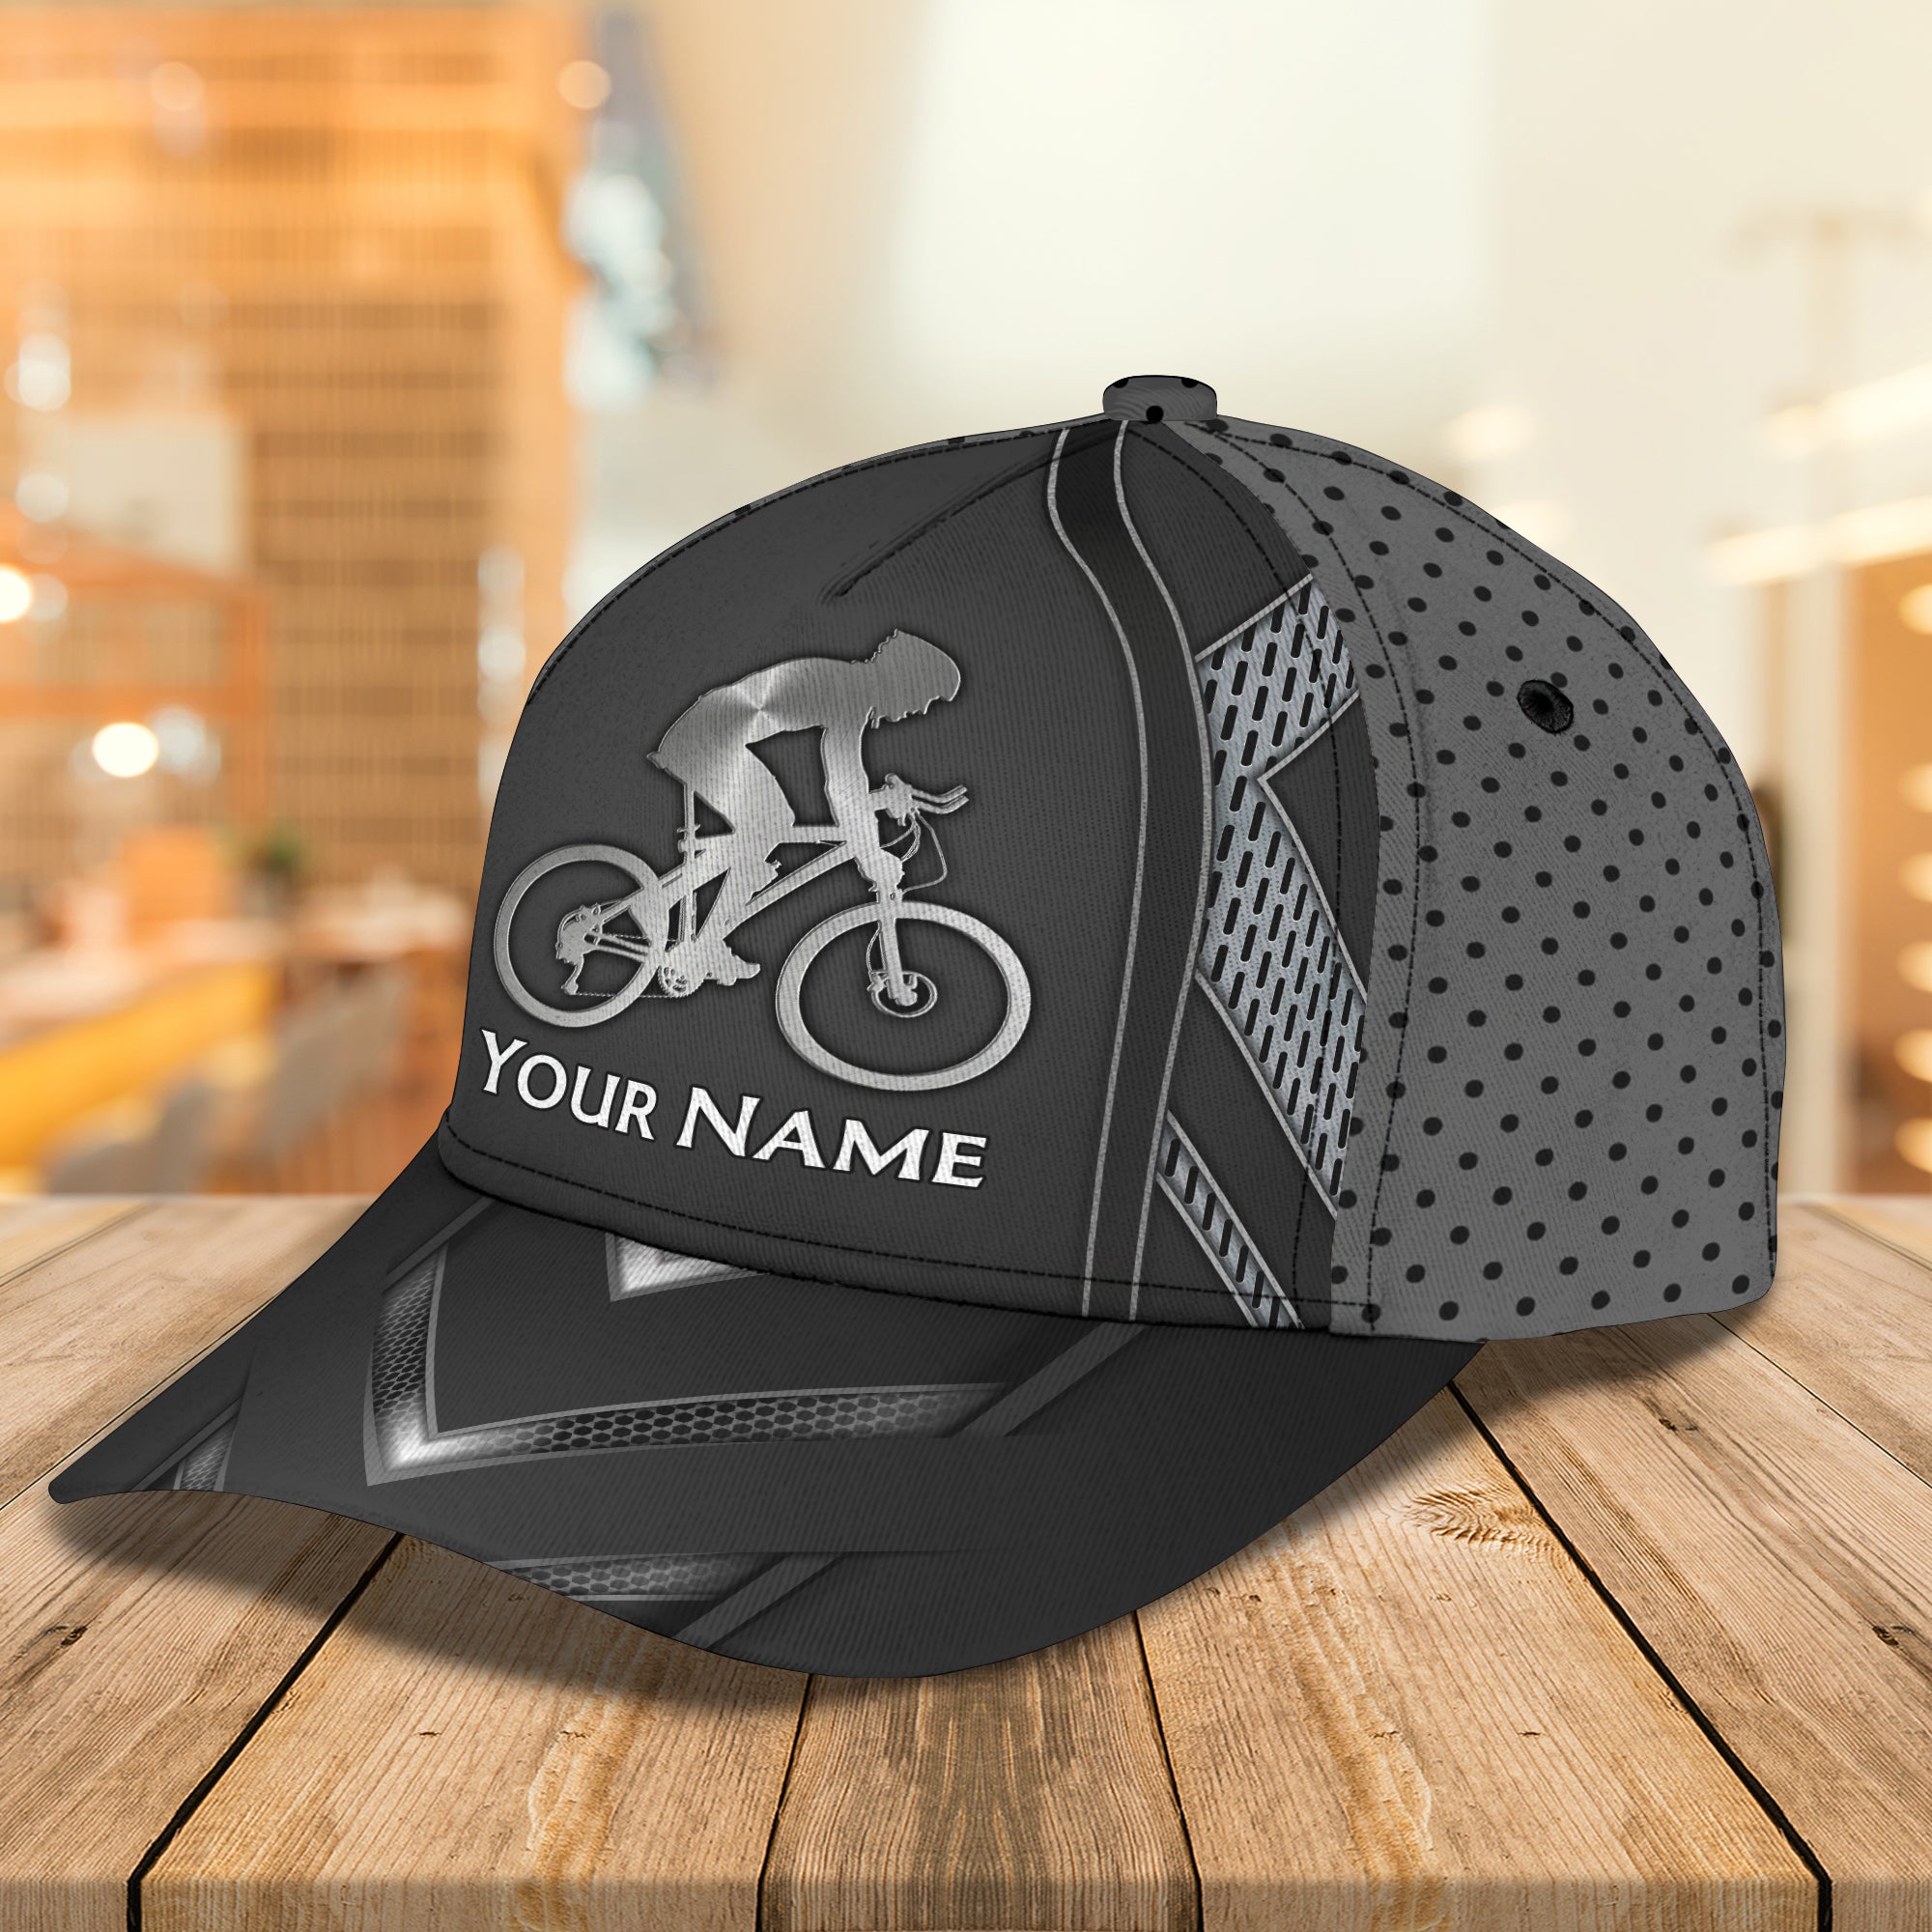 BICYCLE CAP1 - Personalized Name Cap - BY97